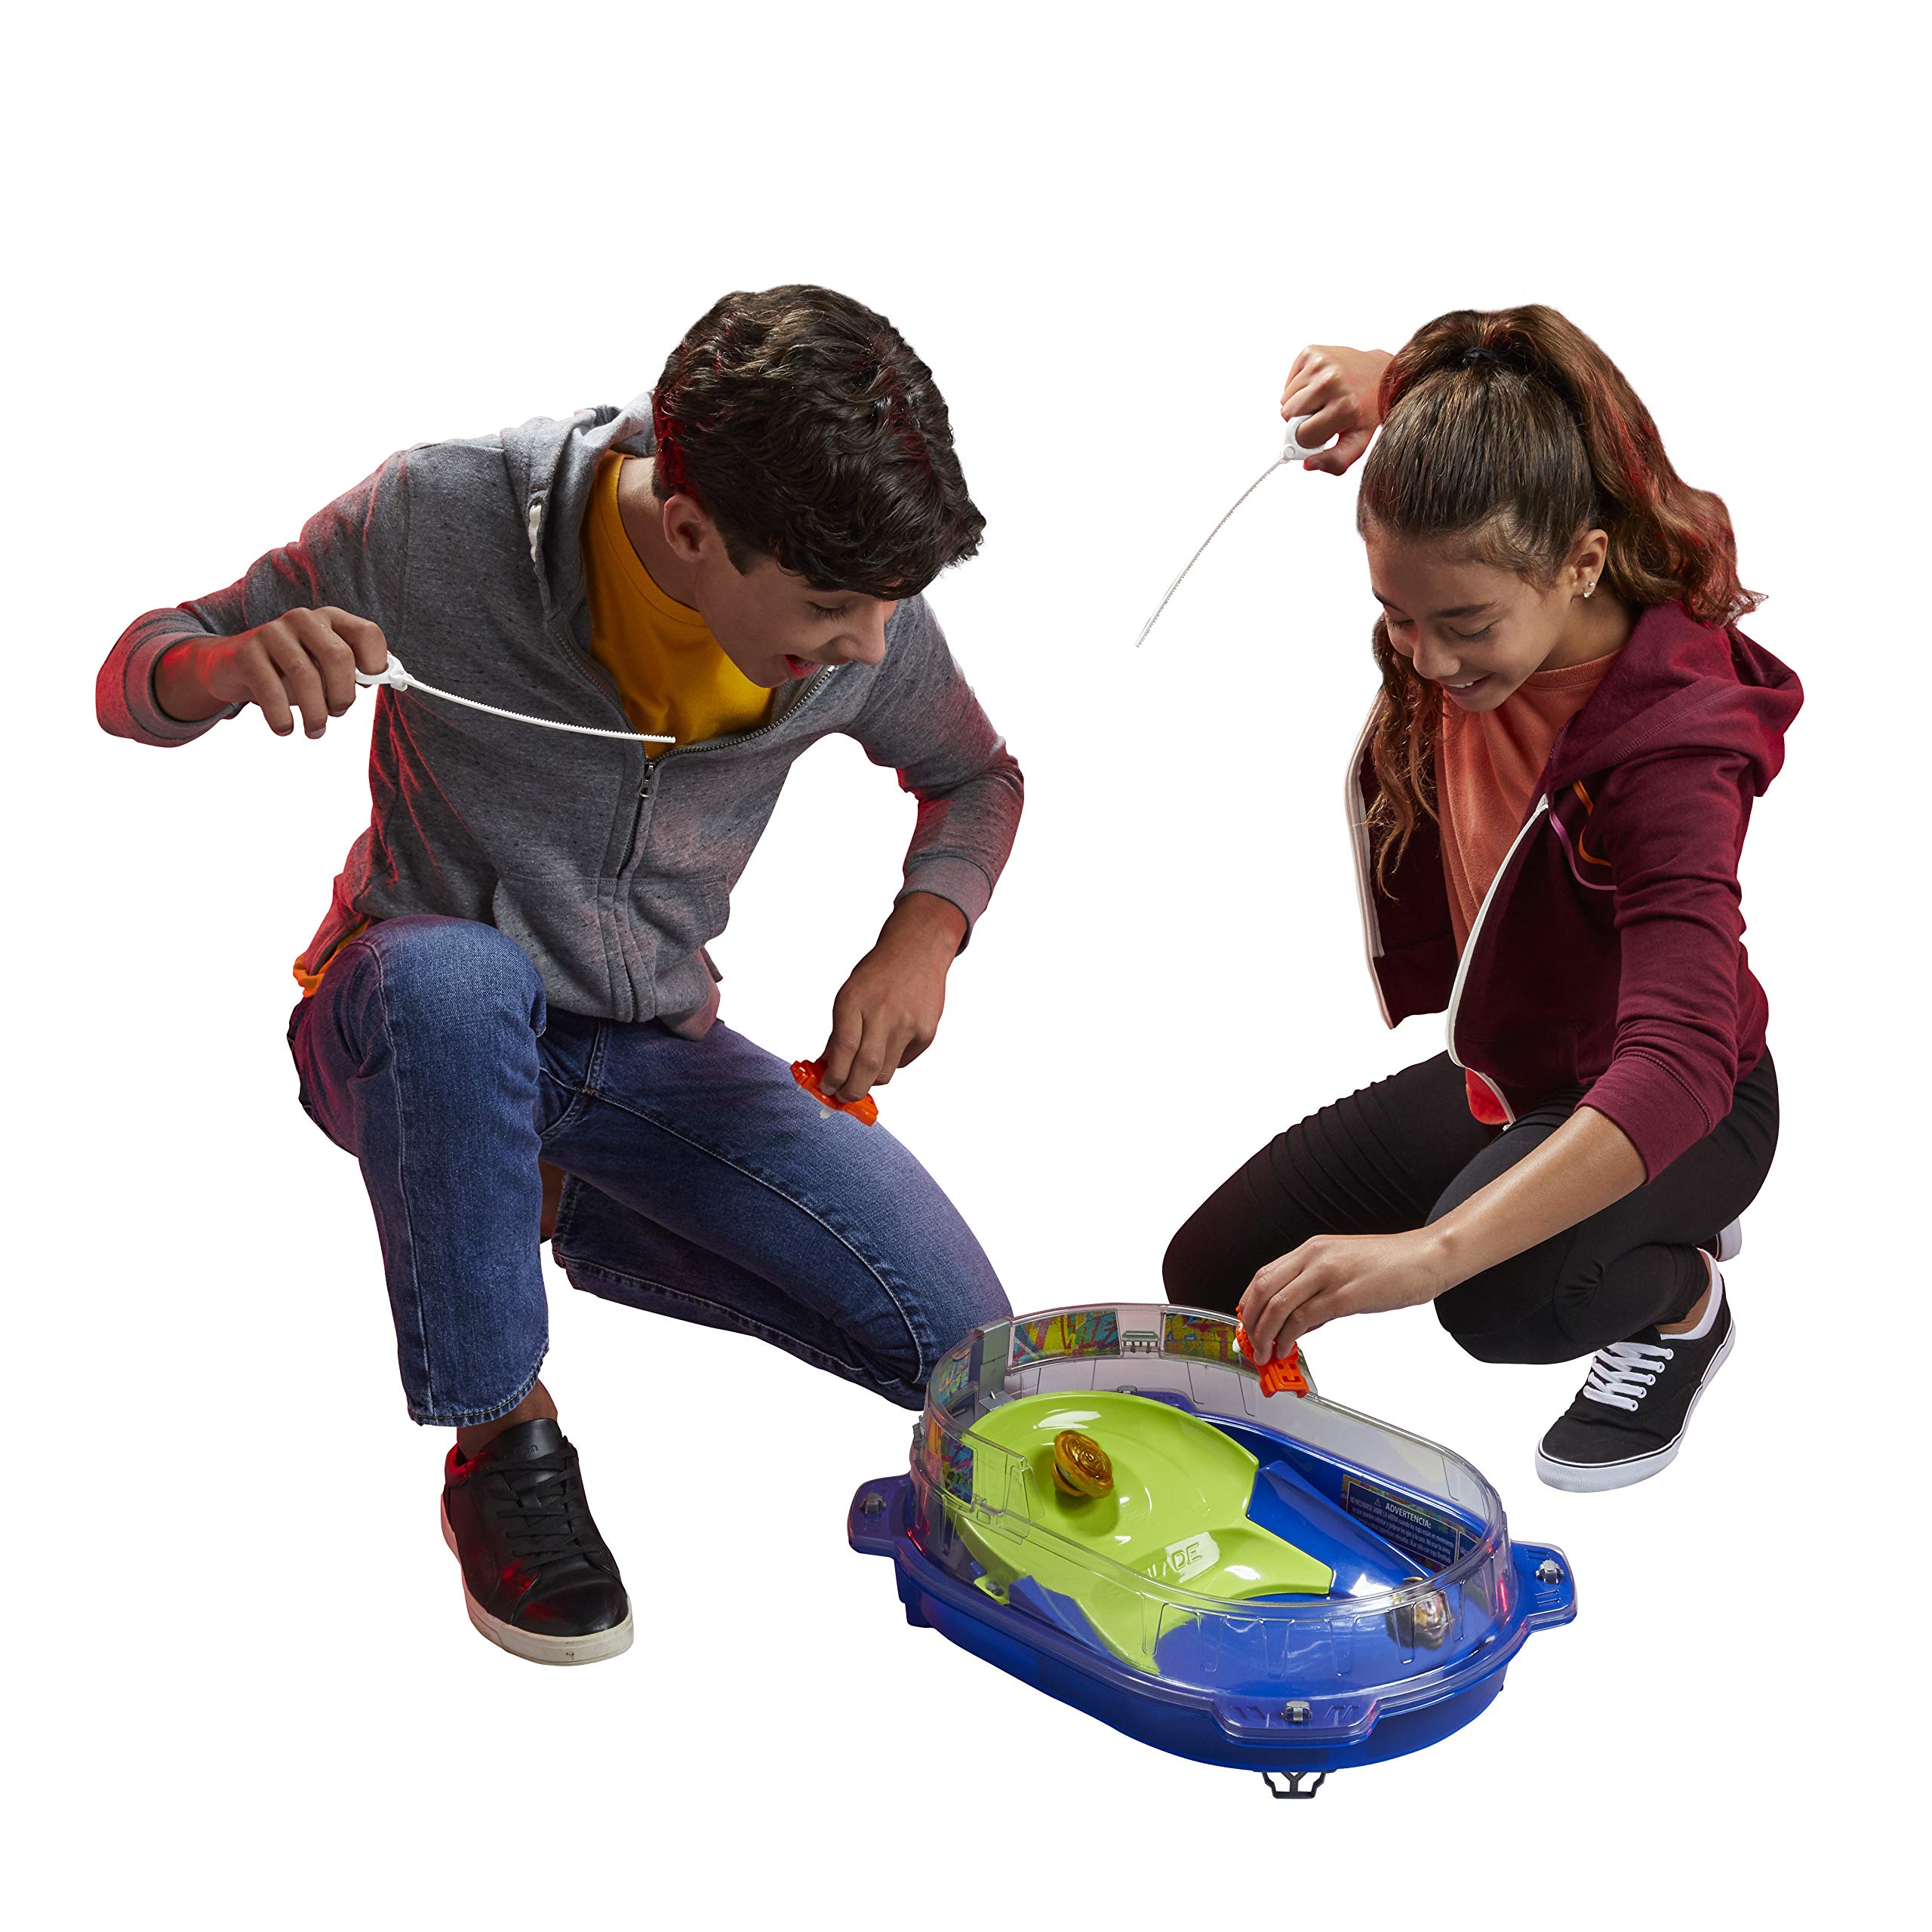 BEYBLADE Burst Rise Hypersphere Vortex Climb Battle Set - Complete Set with Beystadium, 2 Battling Top Toys and 2 Launchers, Ages 8 and Up